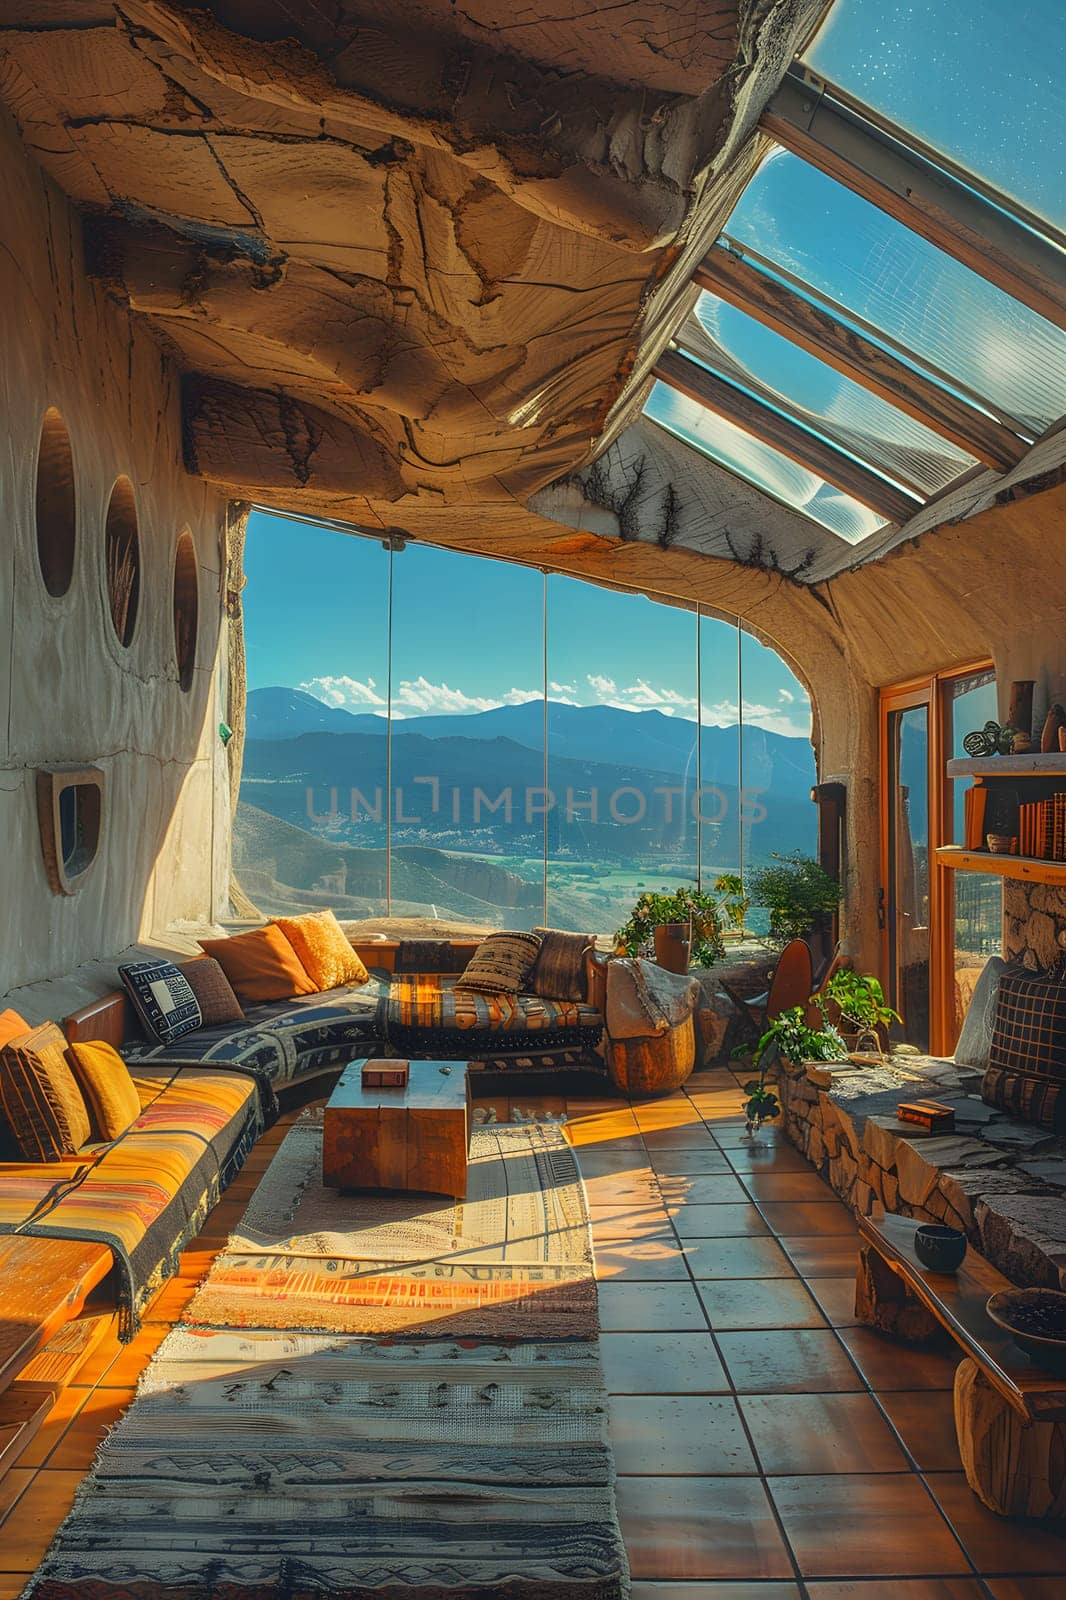 A cozy living room filled with furniture and a window showcasing a stunning view of the mountains. The room is adorned with plants and wooden decor, creating a serene natural landscape indoors